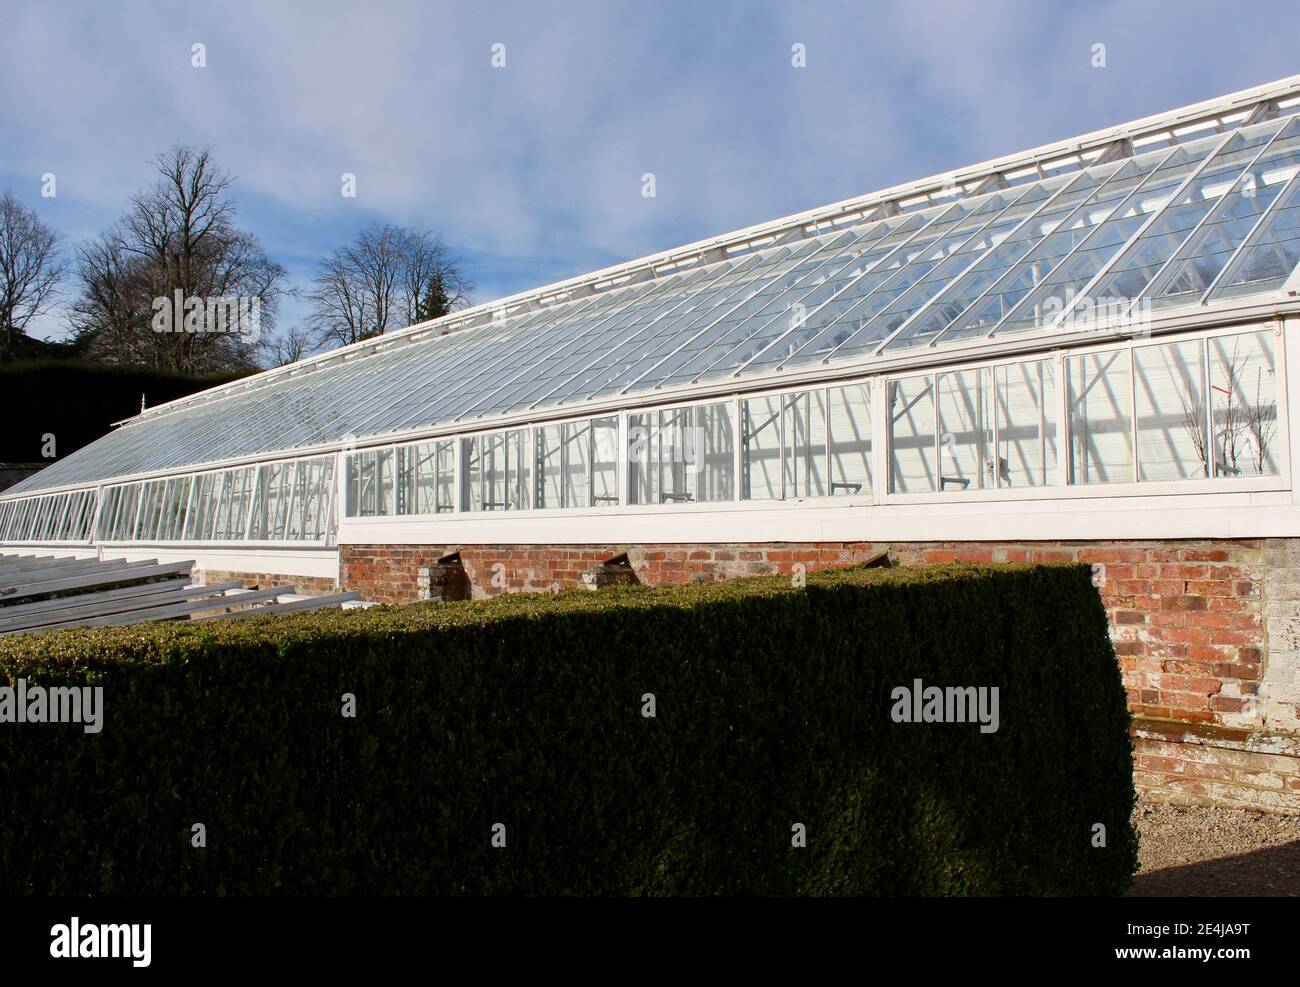 Victorian glasshouse at West Dean Gardens, Chichester with copy space to just add text if needed. Stock Photo